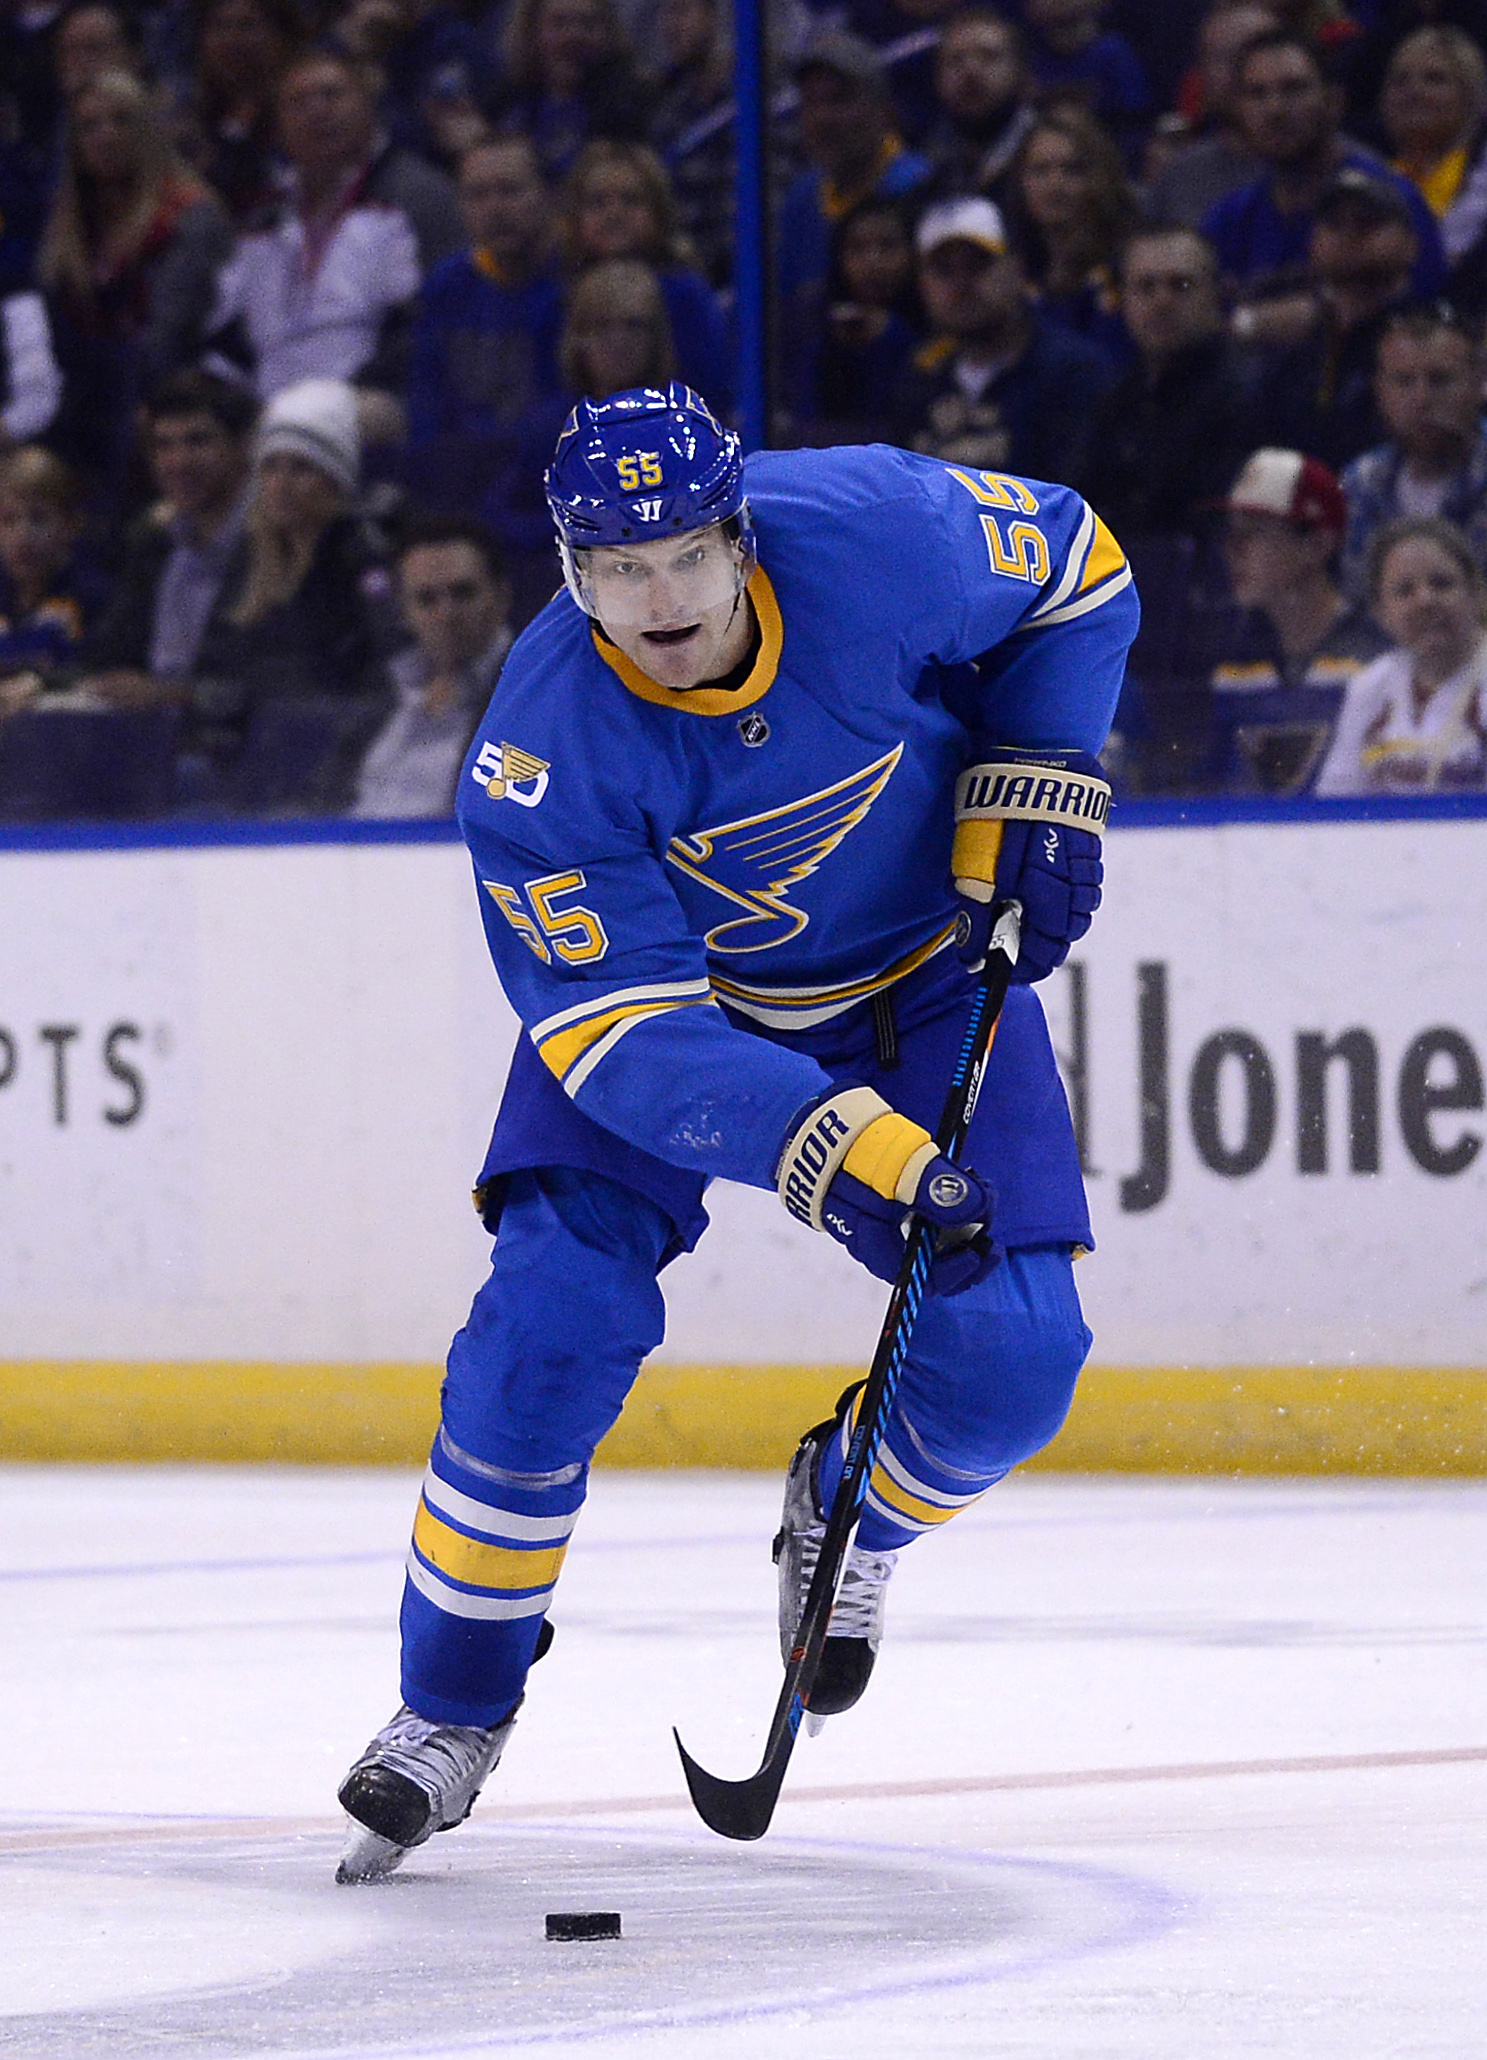 St. Louis Blues Sign Colton Parayko to 8-Year Contract Extension